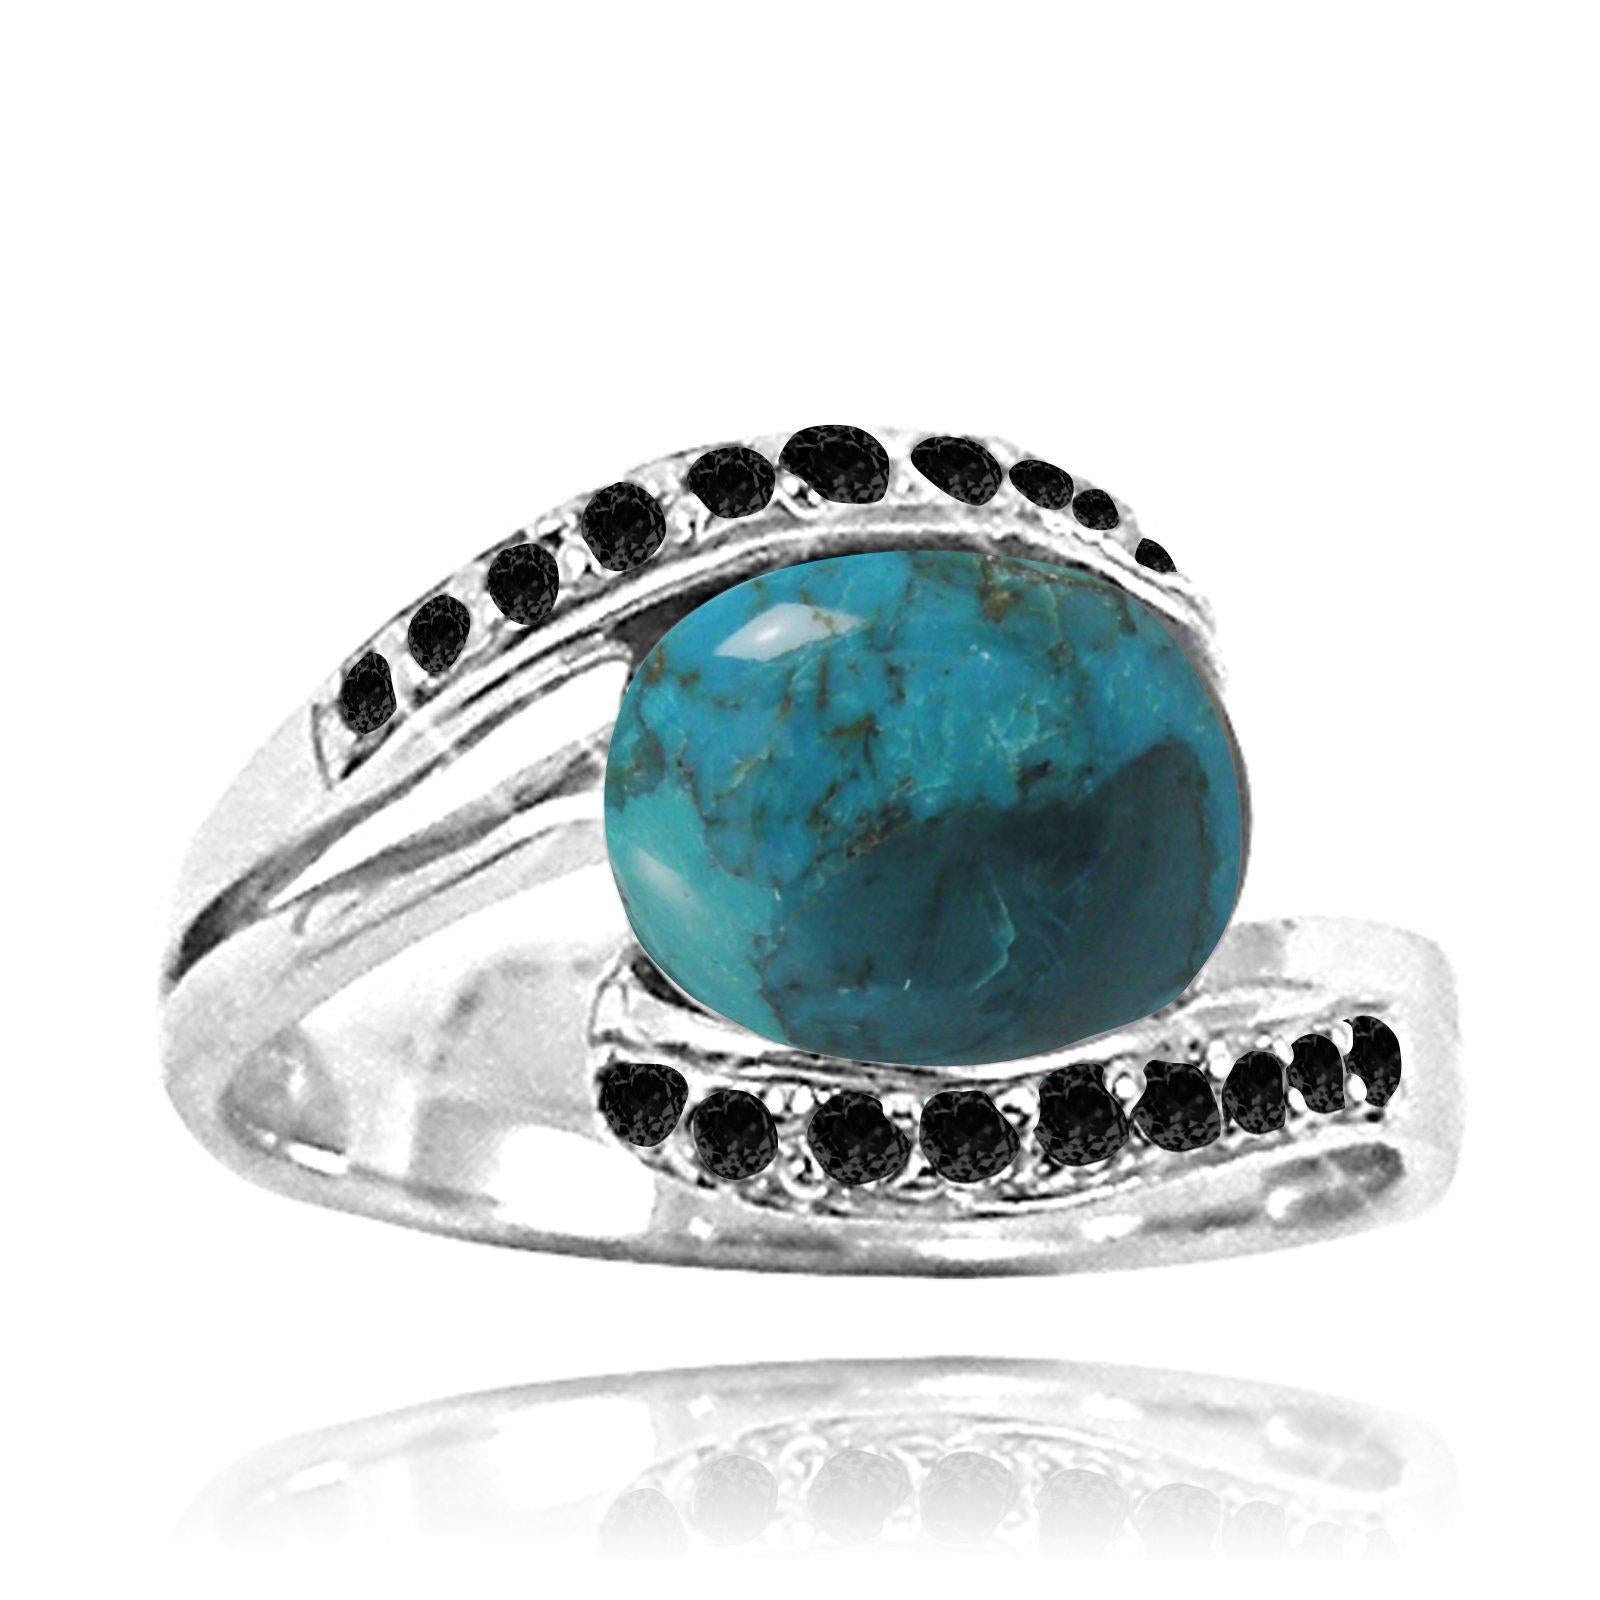 Compressed Turquoise Statement Ring with 18 Round Shape Black Spinal Stones